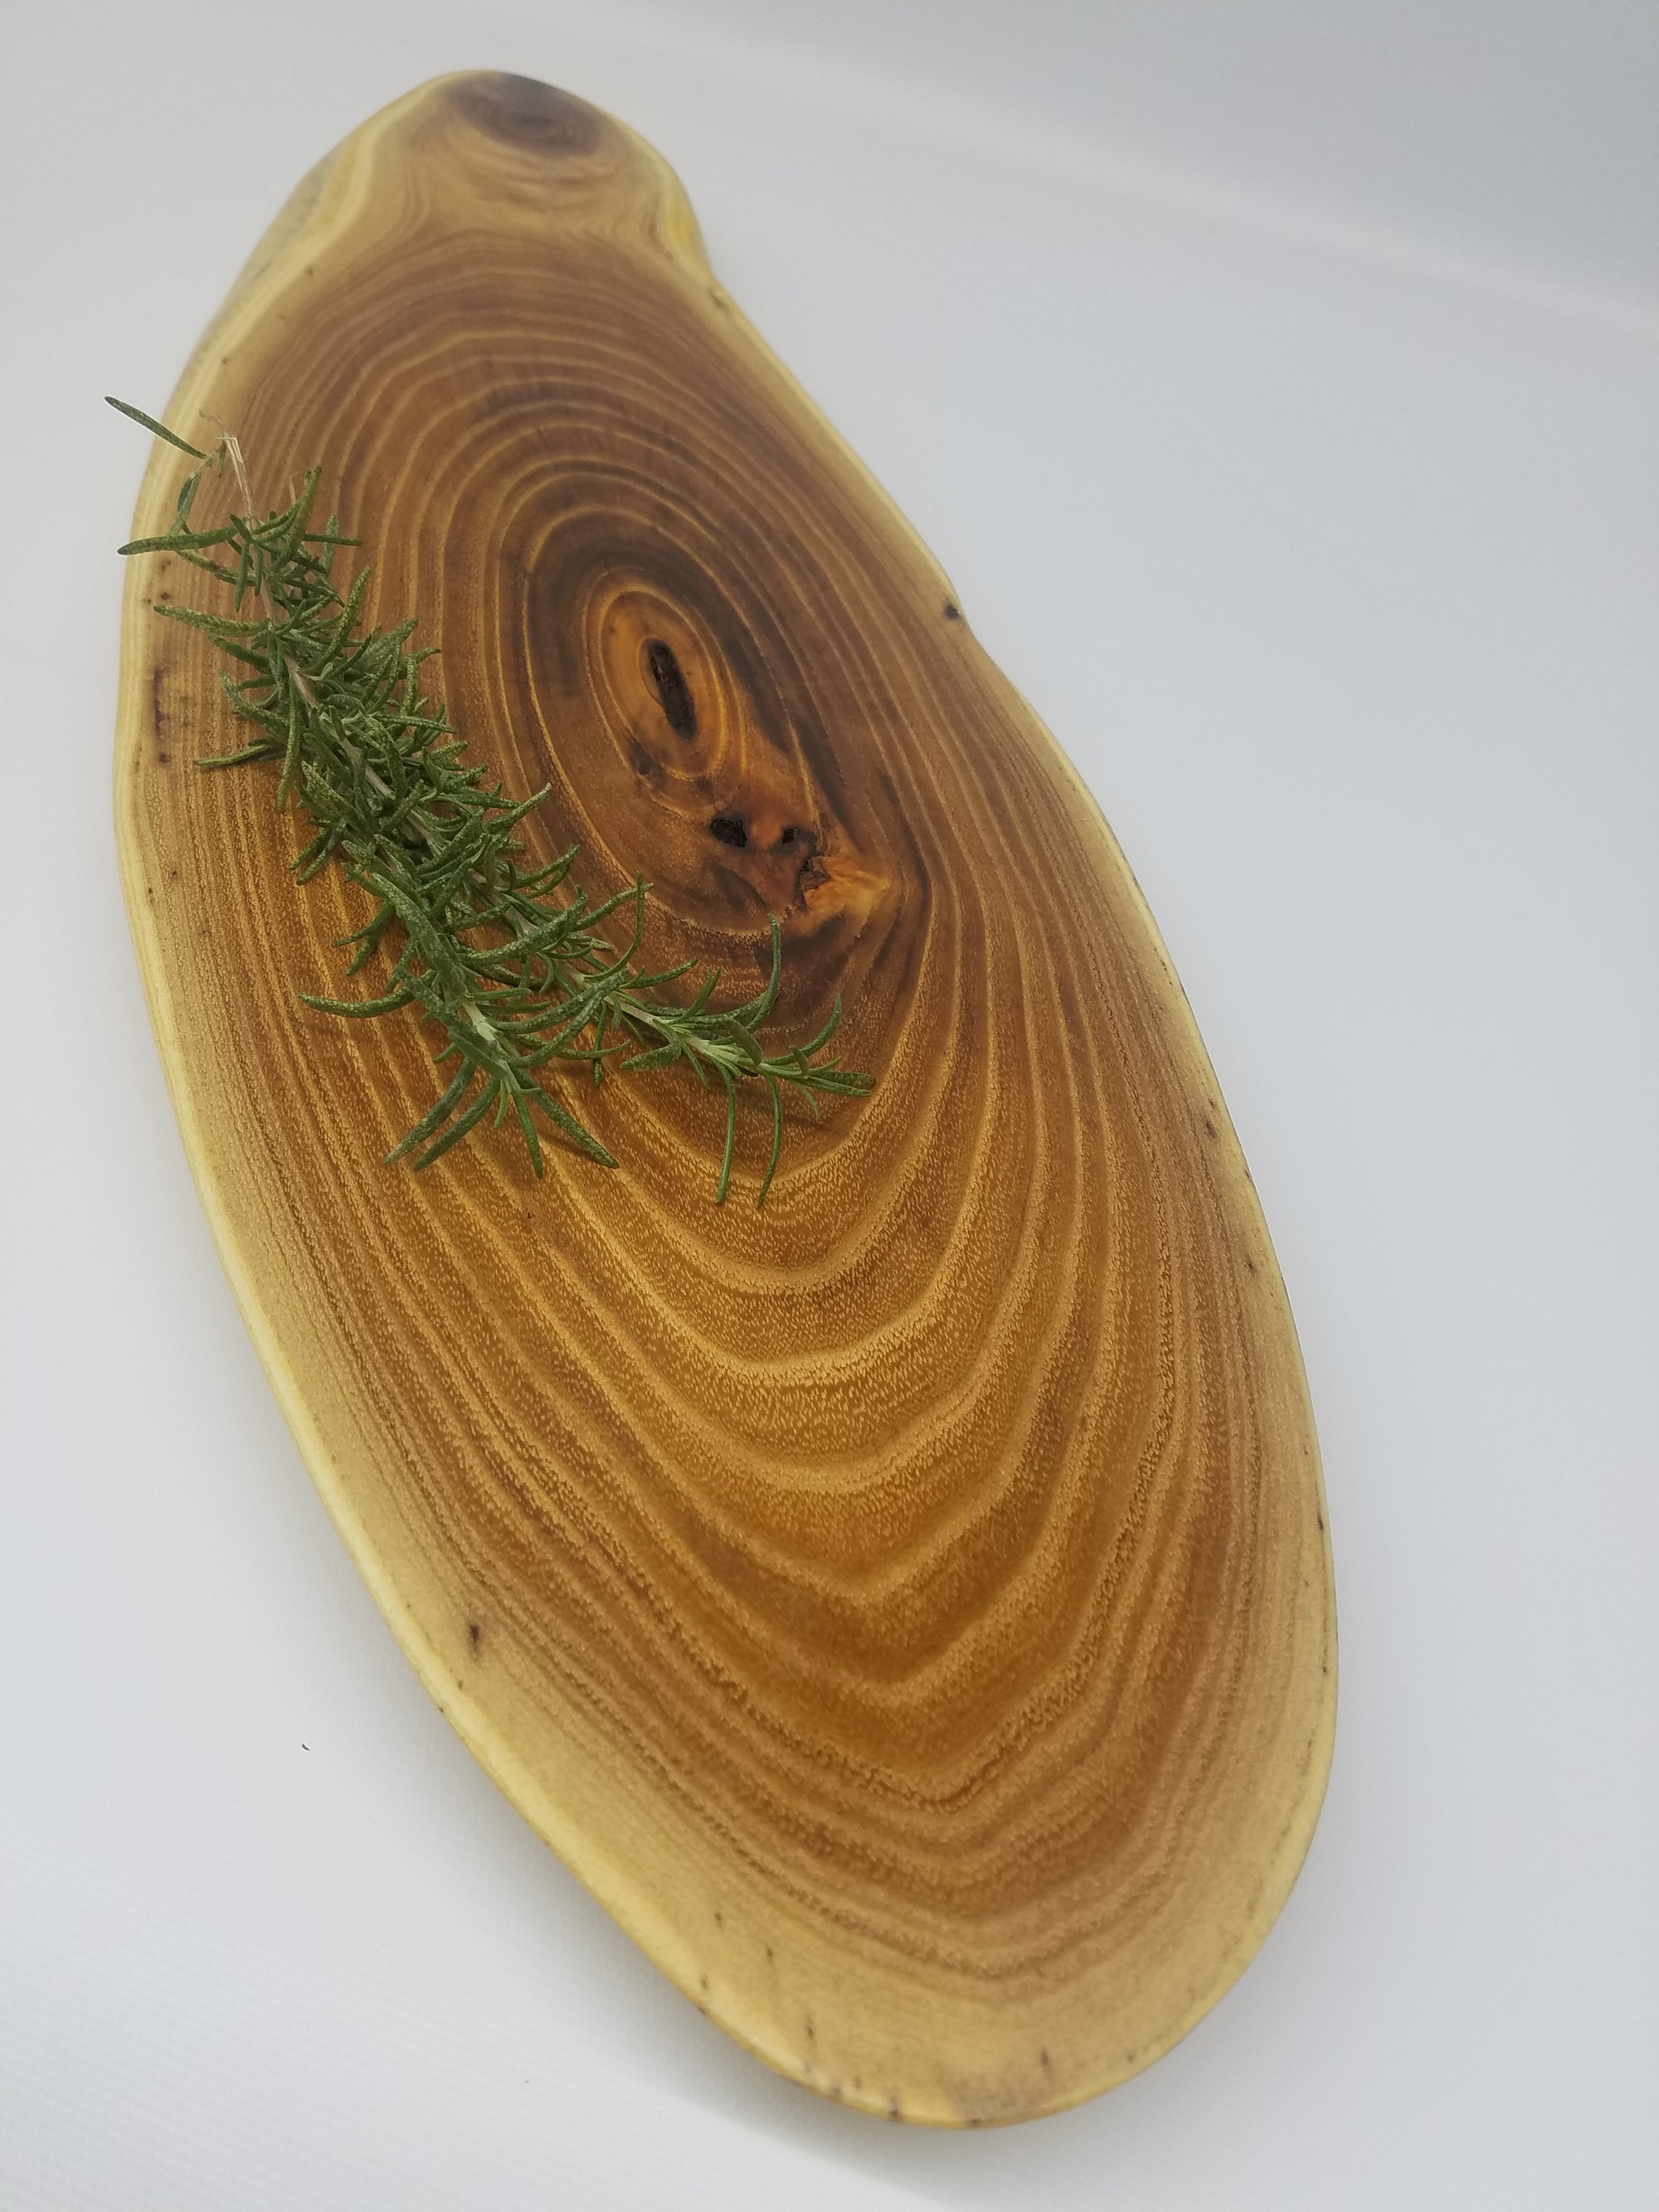 Live Edge Serving Platter- Large- Charcuterie Board- Table Centerpiece- Long and Narrow- Natural Wood- Serving Board- Food Safe- Tree Slice- Black Locust